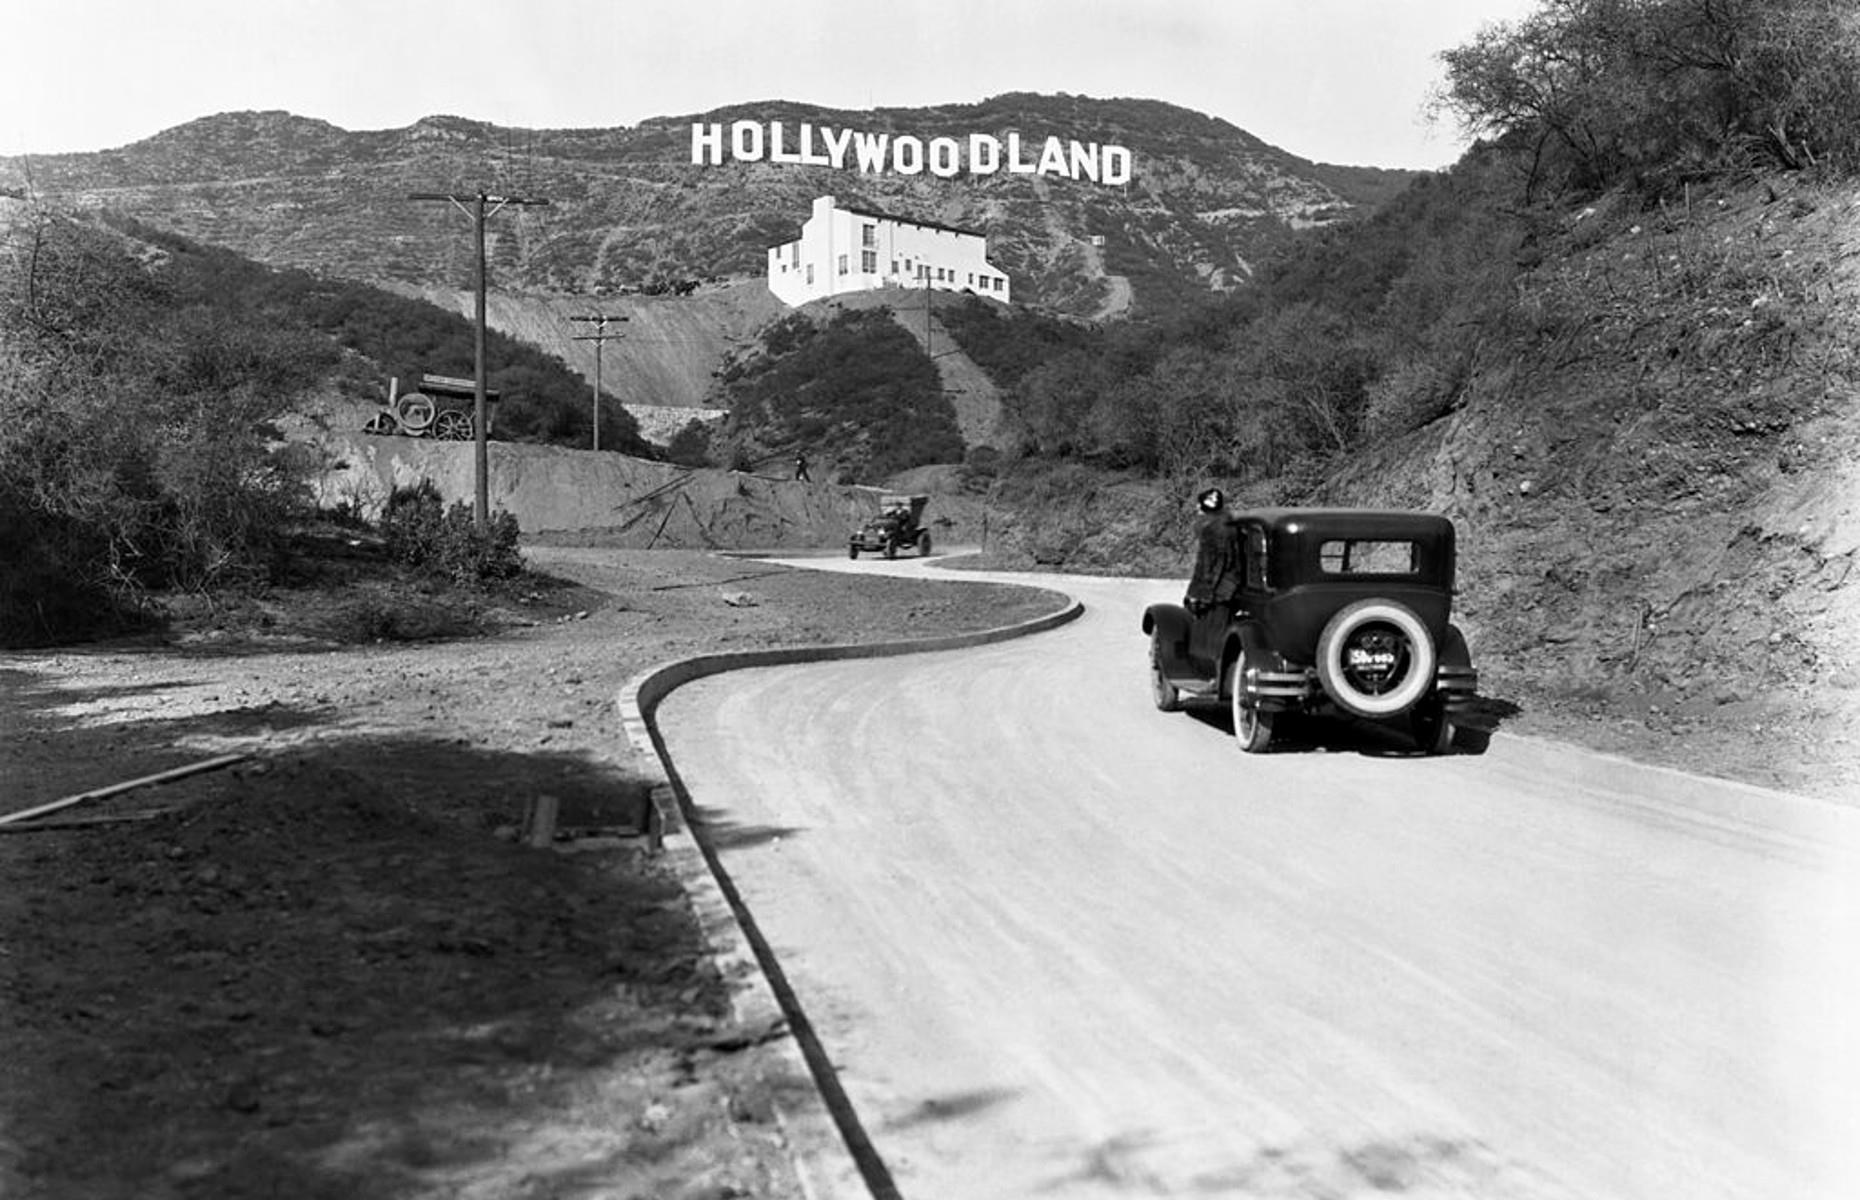 <p>Here, a sign advertises the opening of the Hollywoodland housing development in the Mulholland Drive hills in 1924. The white building is the Kanst Art Gallery. The large film companies, such as Warner Bros. and Colombia, had already arrived and they brought the movie stars, the development and, of course, the tourists who now dominate this area.</p>  <p><a href="https://www.loveexploring.com/guides/88050/where-to-go-in-los-angeles-hollywood-beverly-hills-silver-lake-venice-beach"><strong>Delve into Los Angeles' neighborhoods with our guide</strong></a></p>